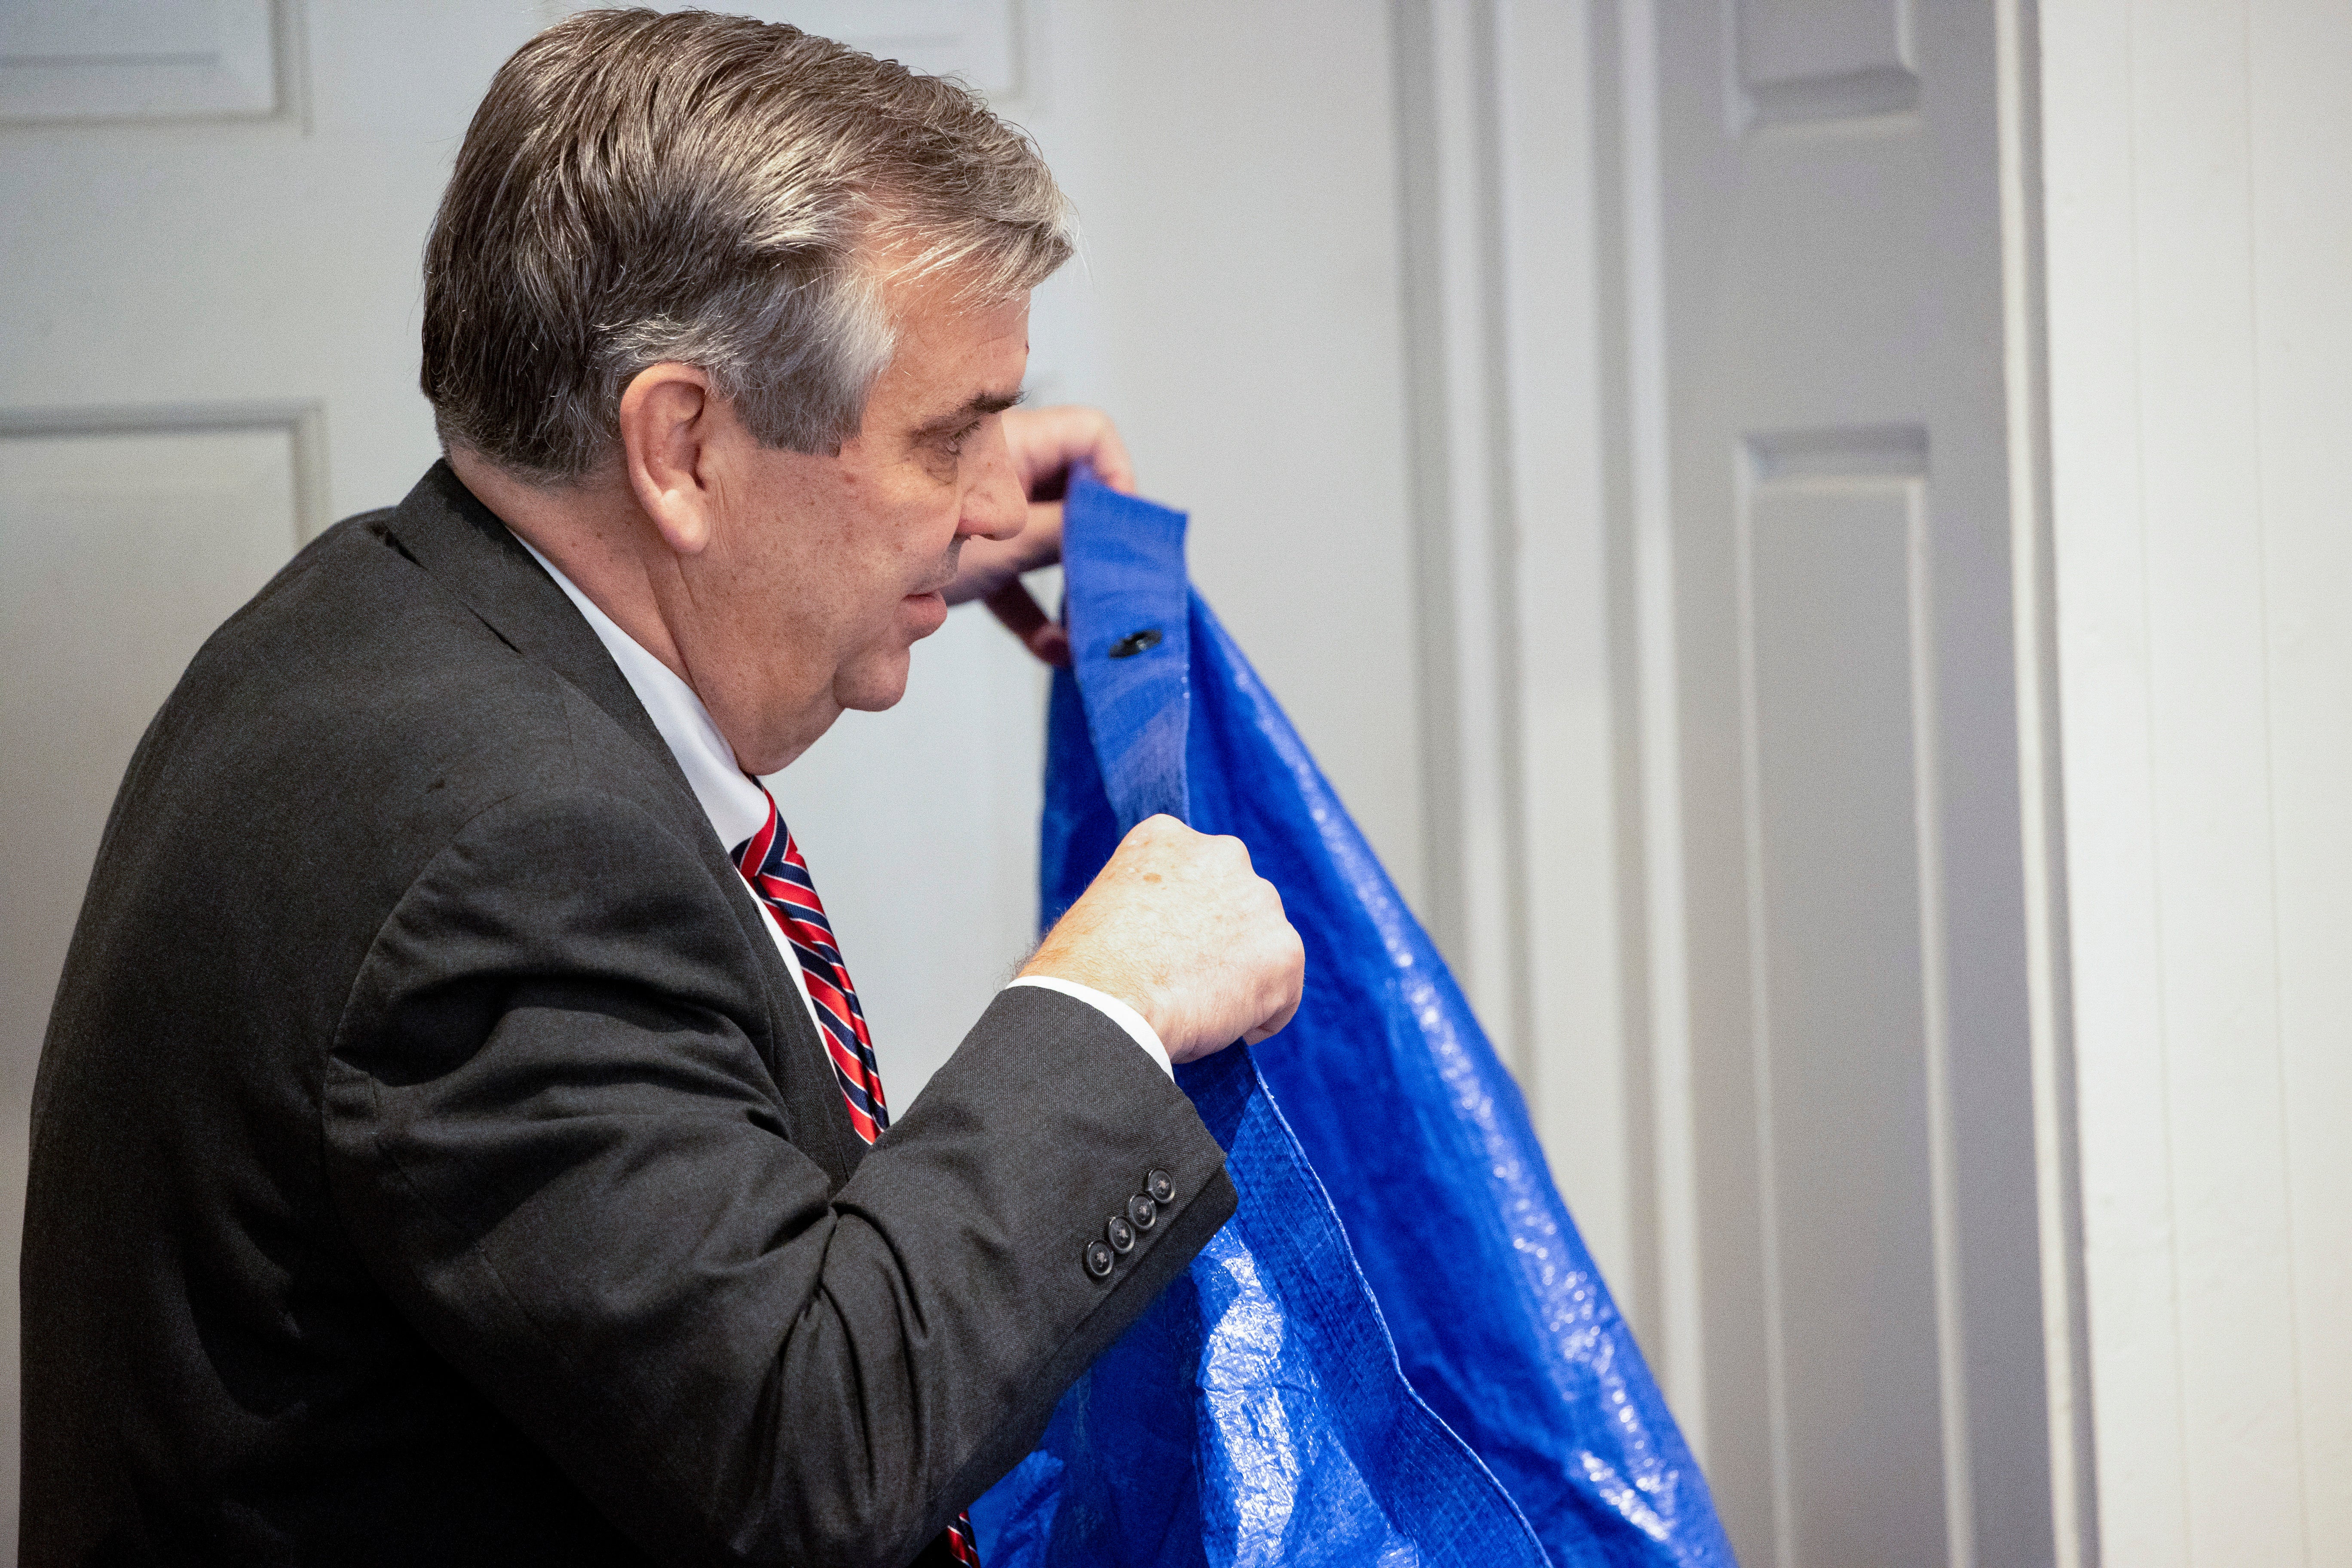 Prosecutor holds up blue tarp during trial